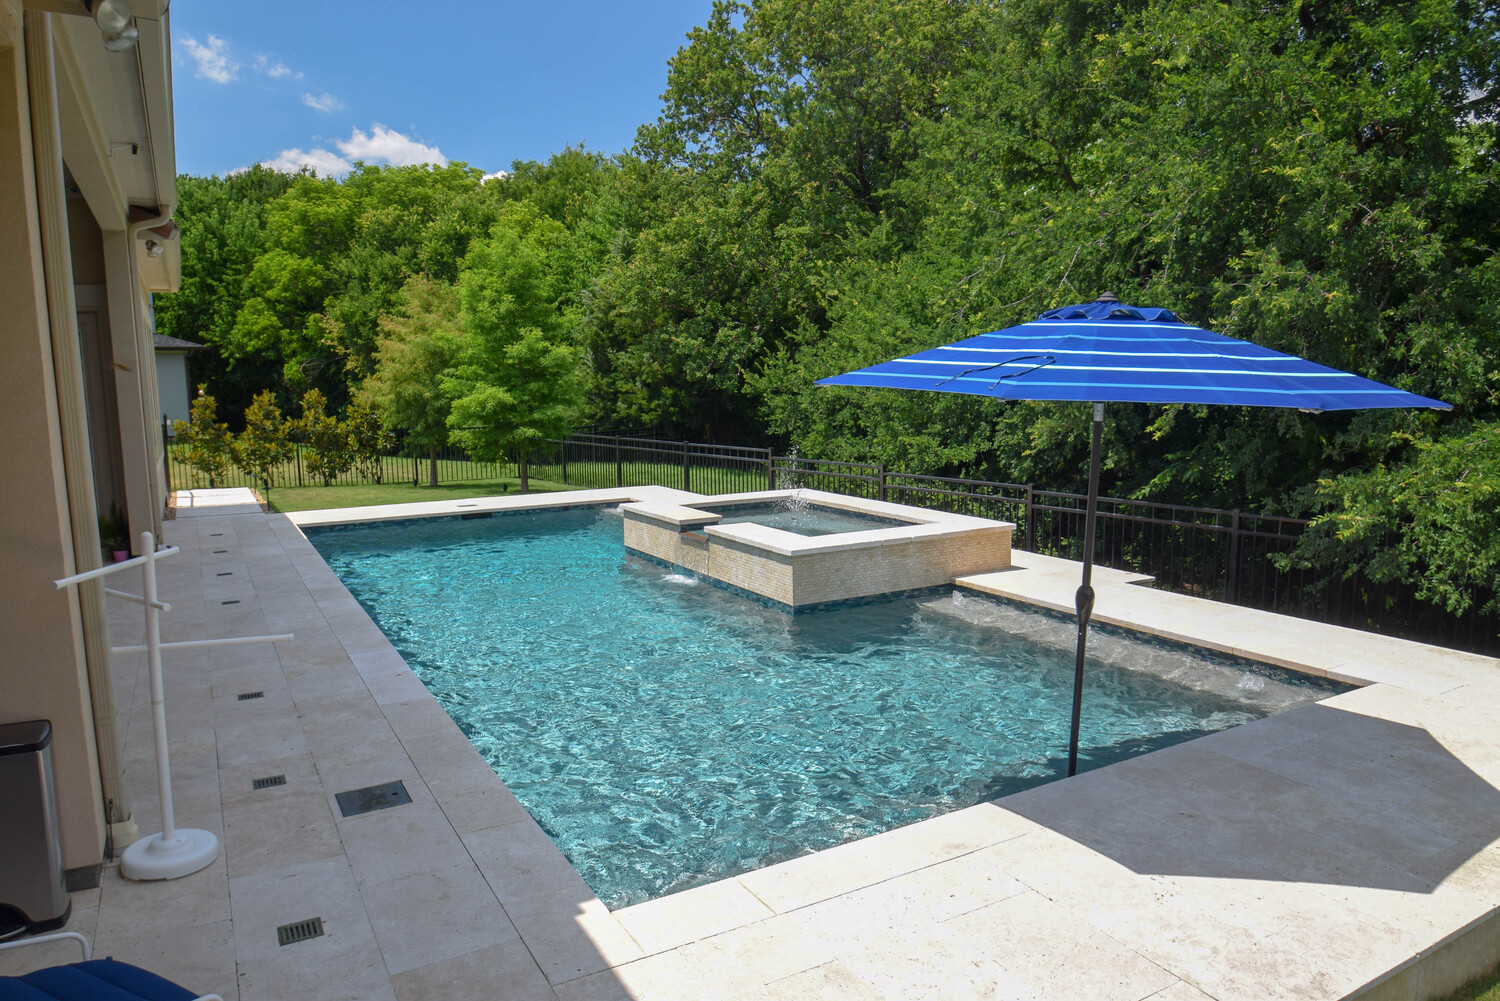 Backyard swimming pool with water feature and umbrella - Miller Pools